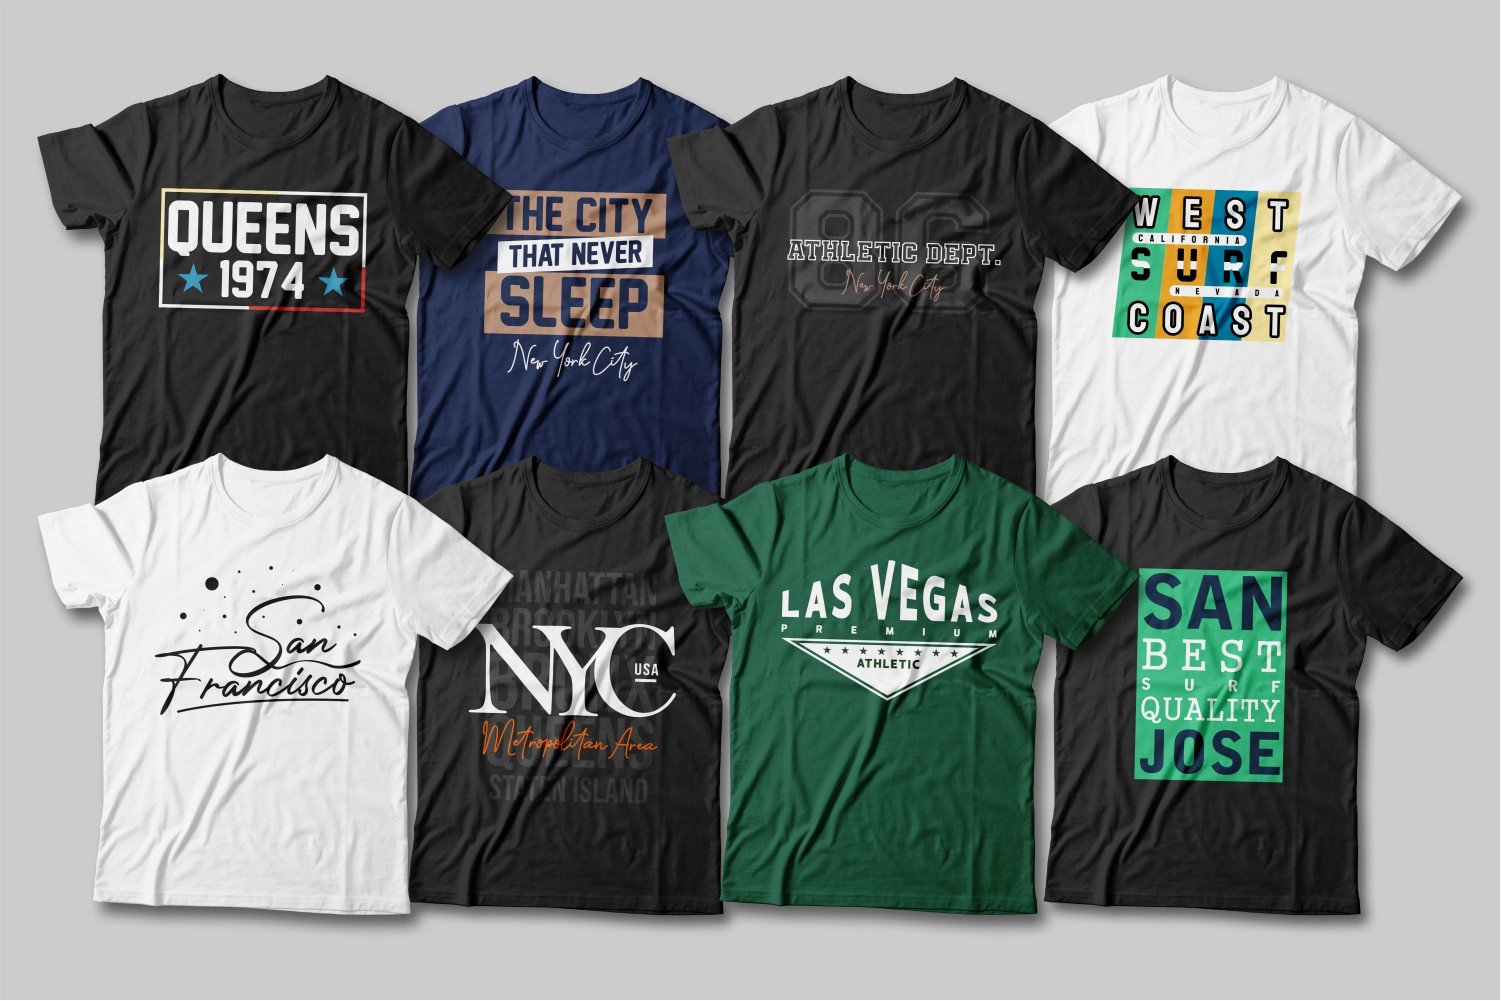 Different T-shirts with different logos and inscriptions.